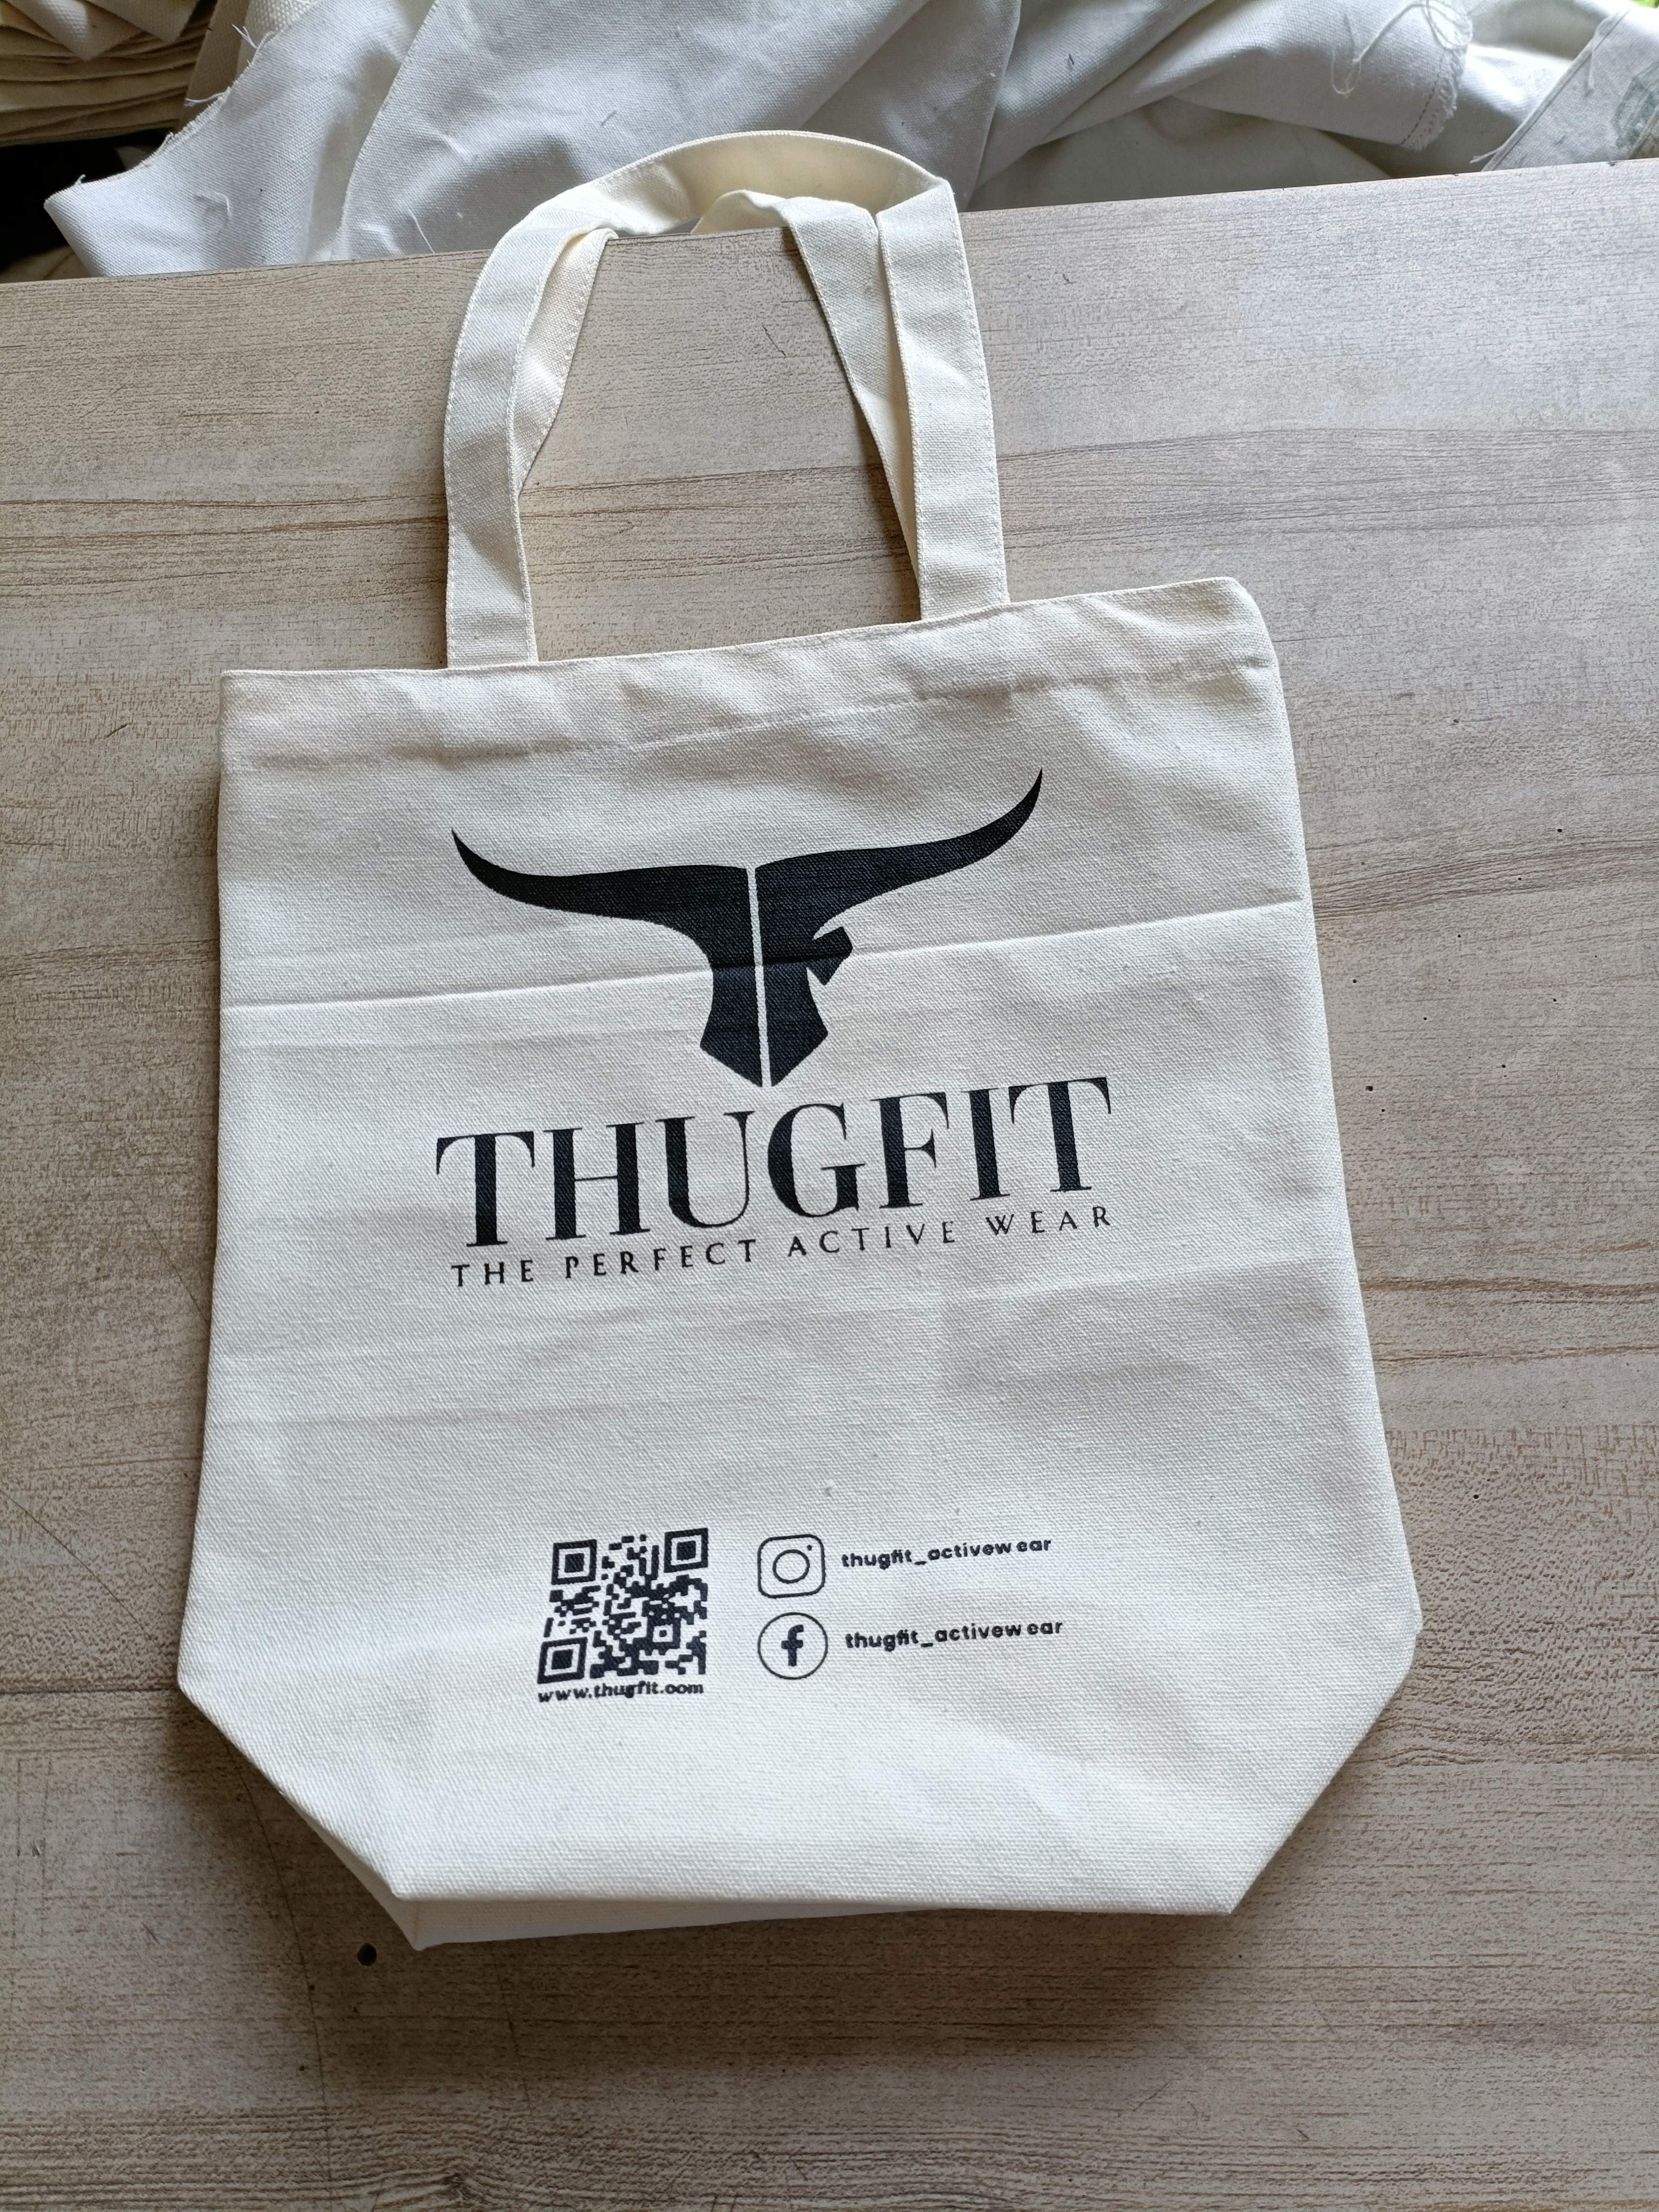 THUGFIT Chic and Sustainable Canvas Tote for Stylish Shopping